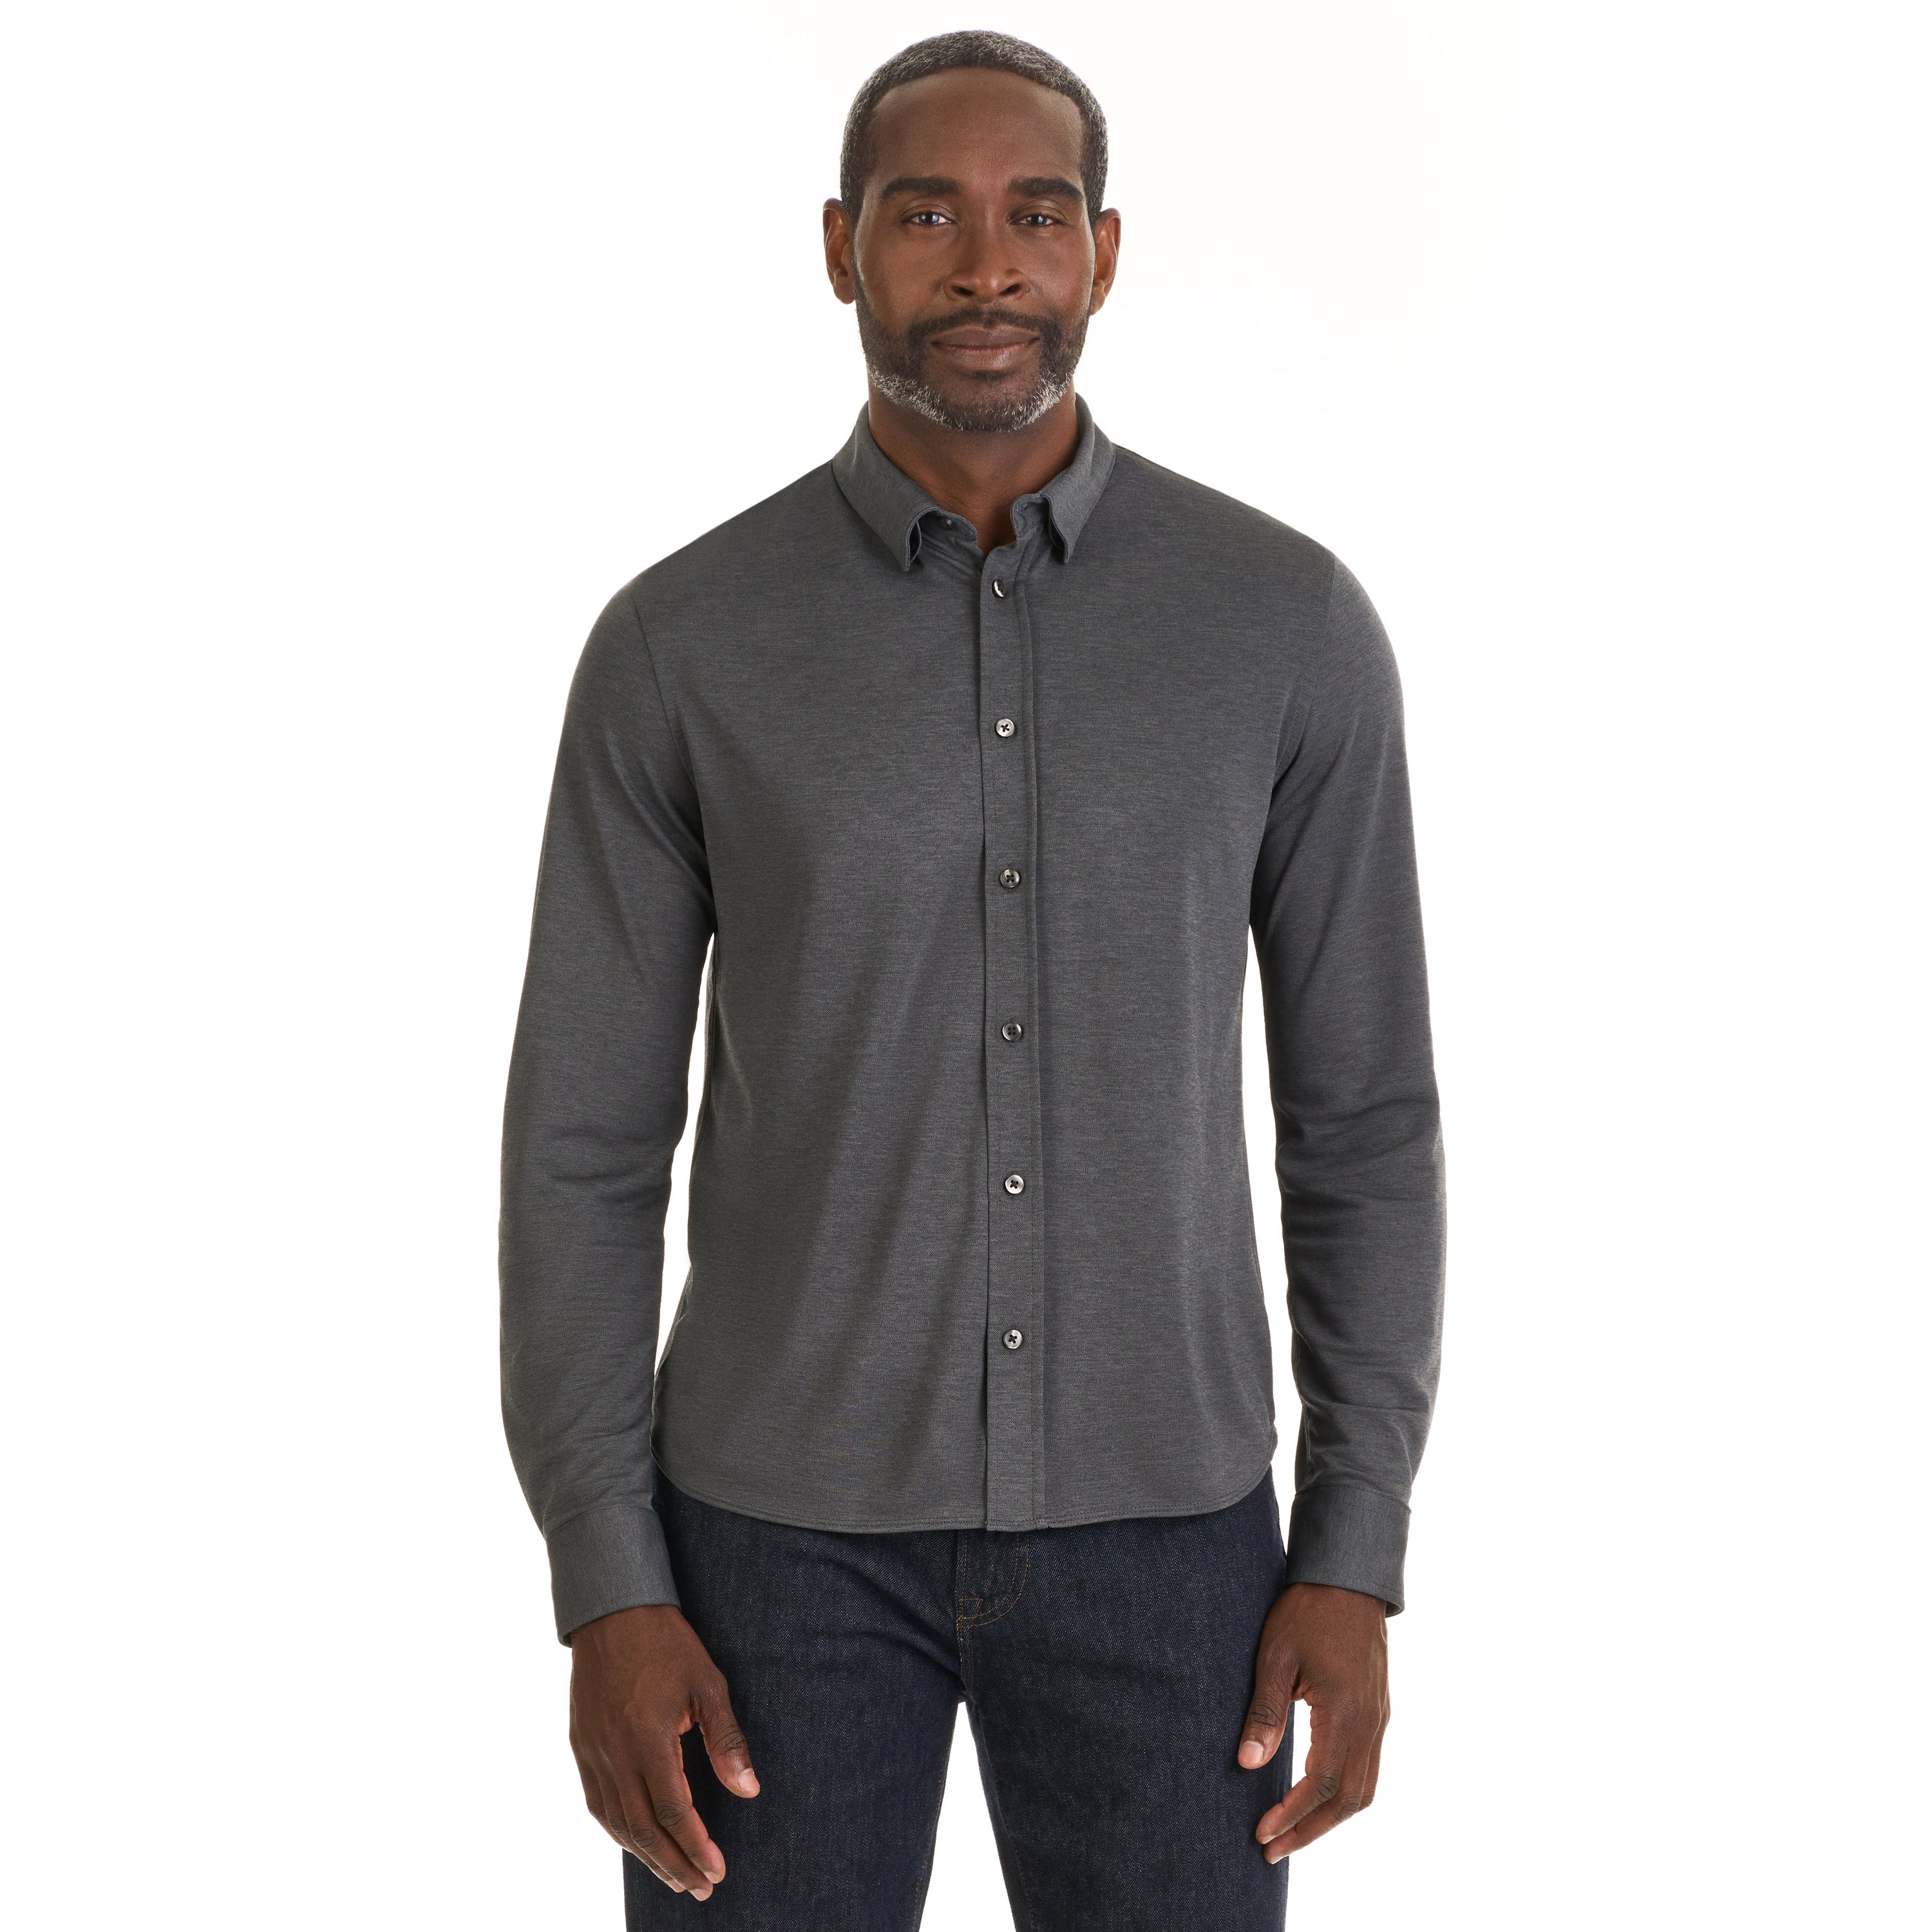 Performance Knit Solid Long Sleeve Button Up Top – Slim Fit